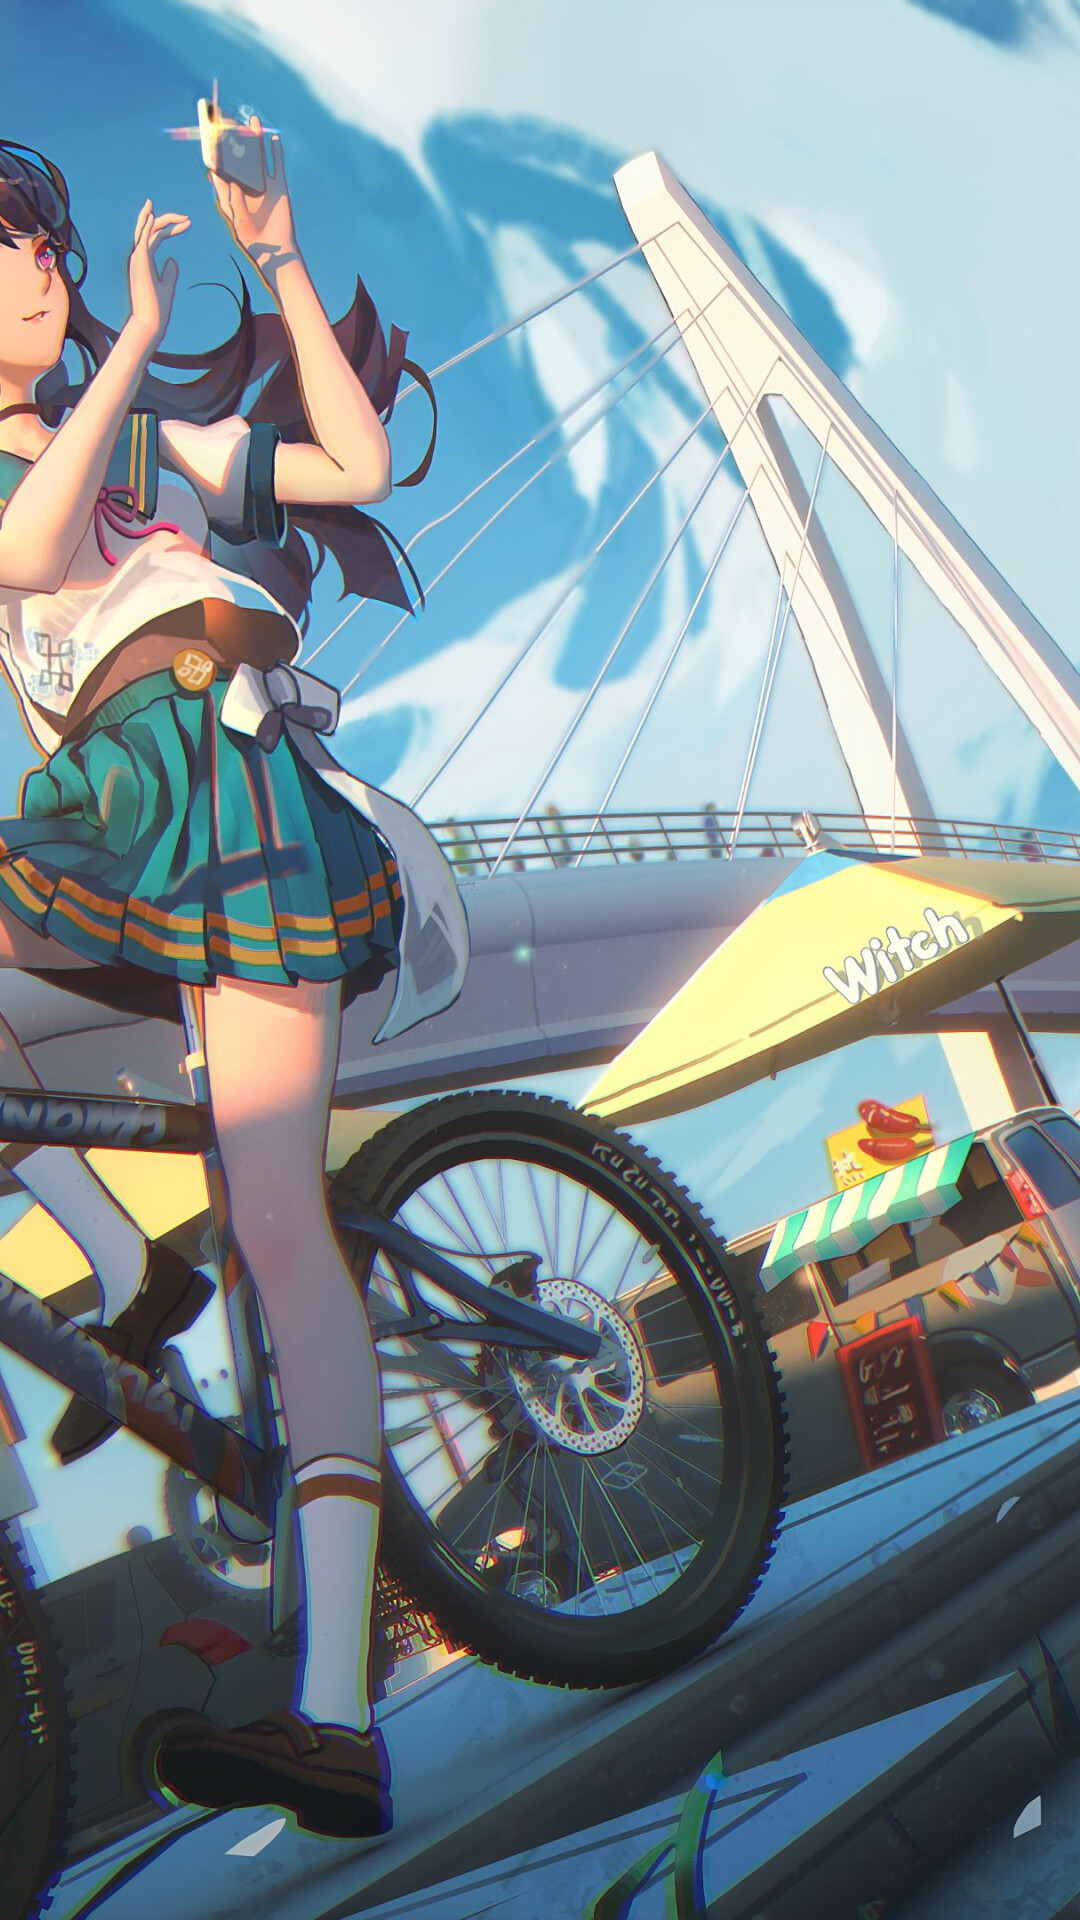 Girl and Bike: Anime girl character, Taking pictures, Riding a bicycle around the city. 1080x1920 Full HD Wallpaper.